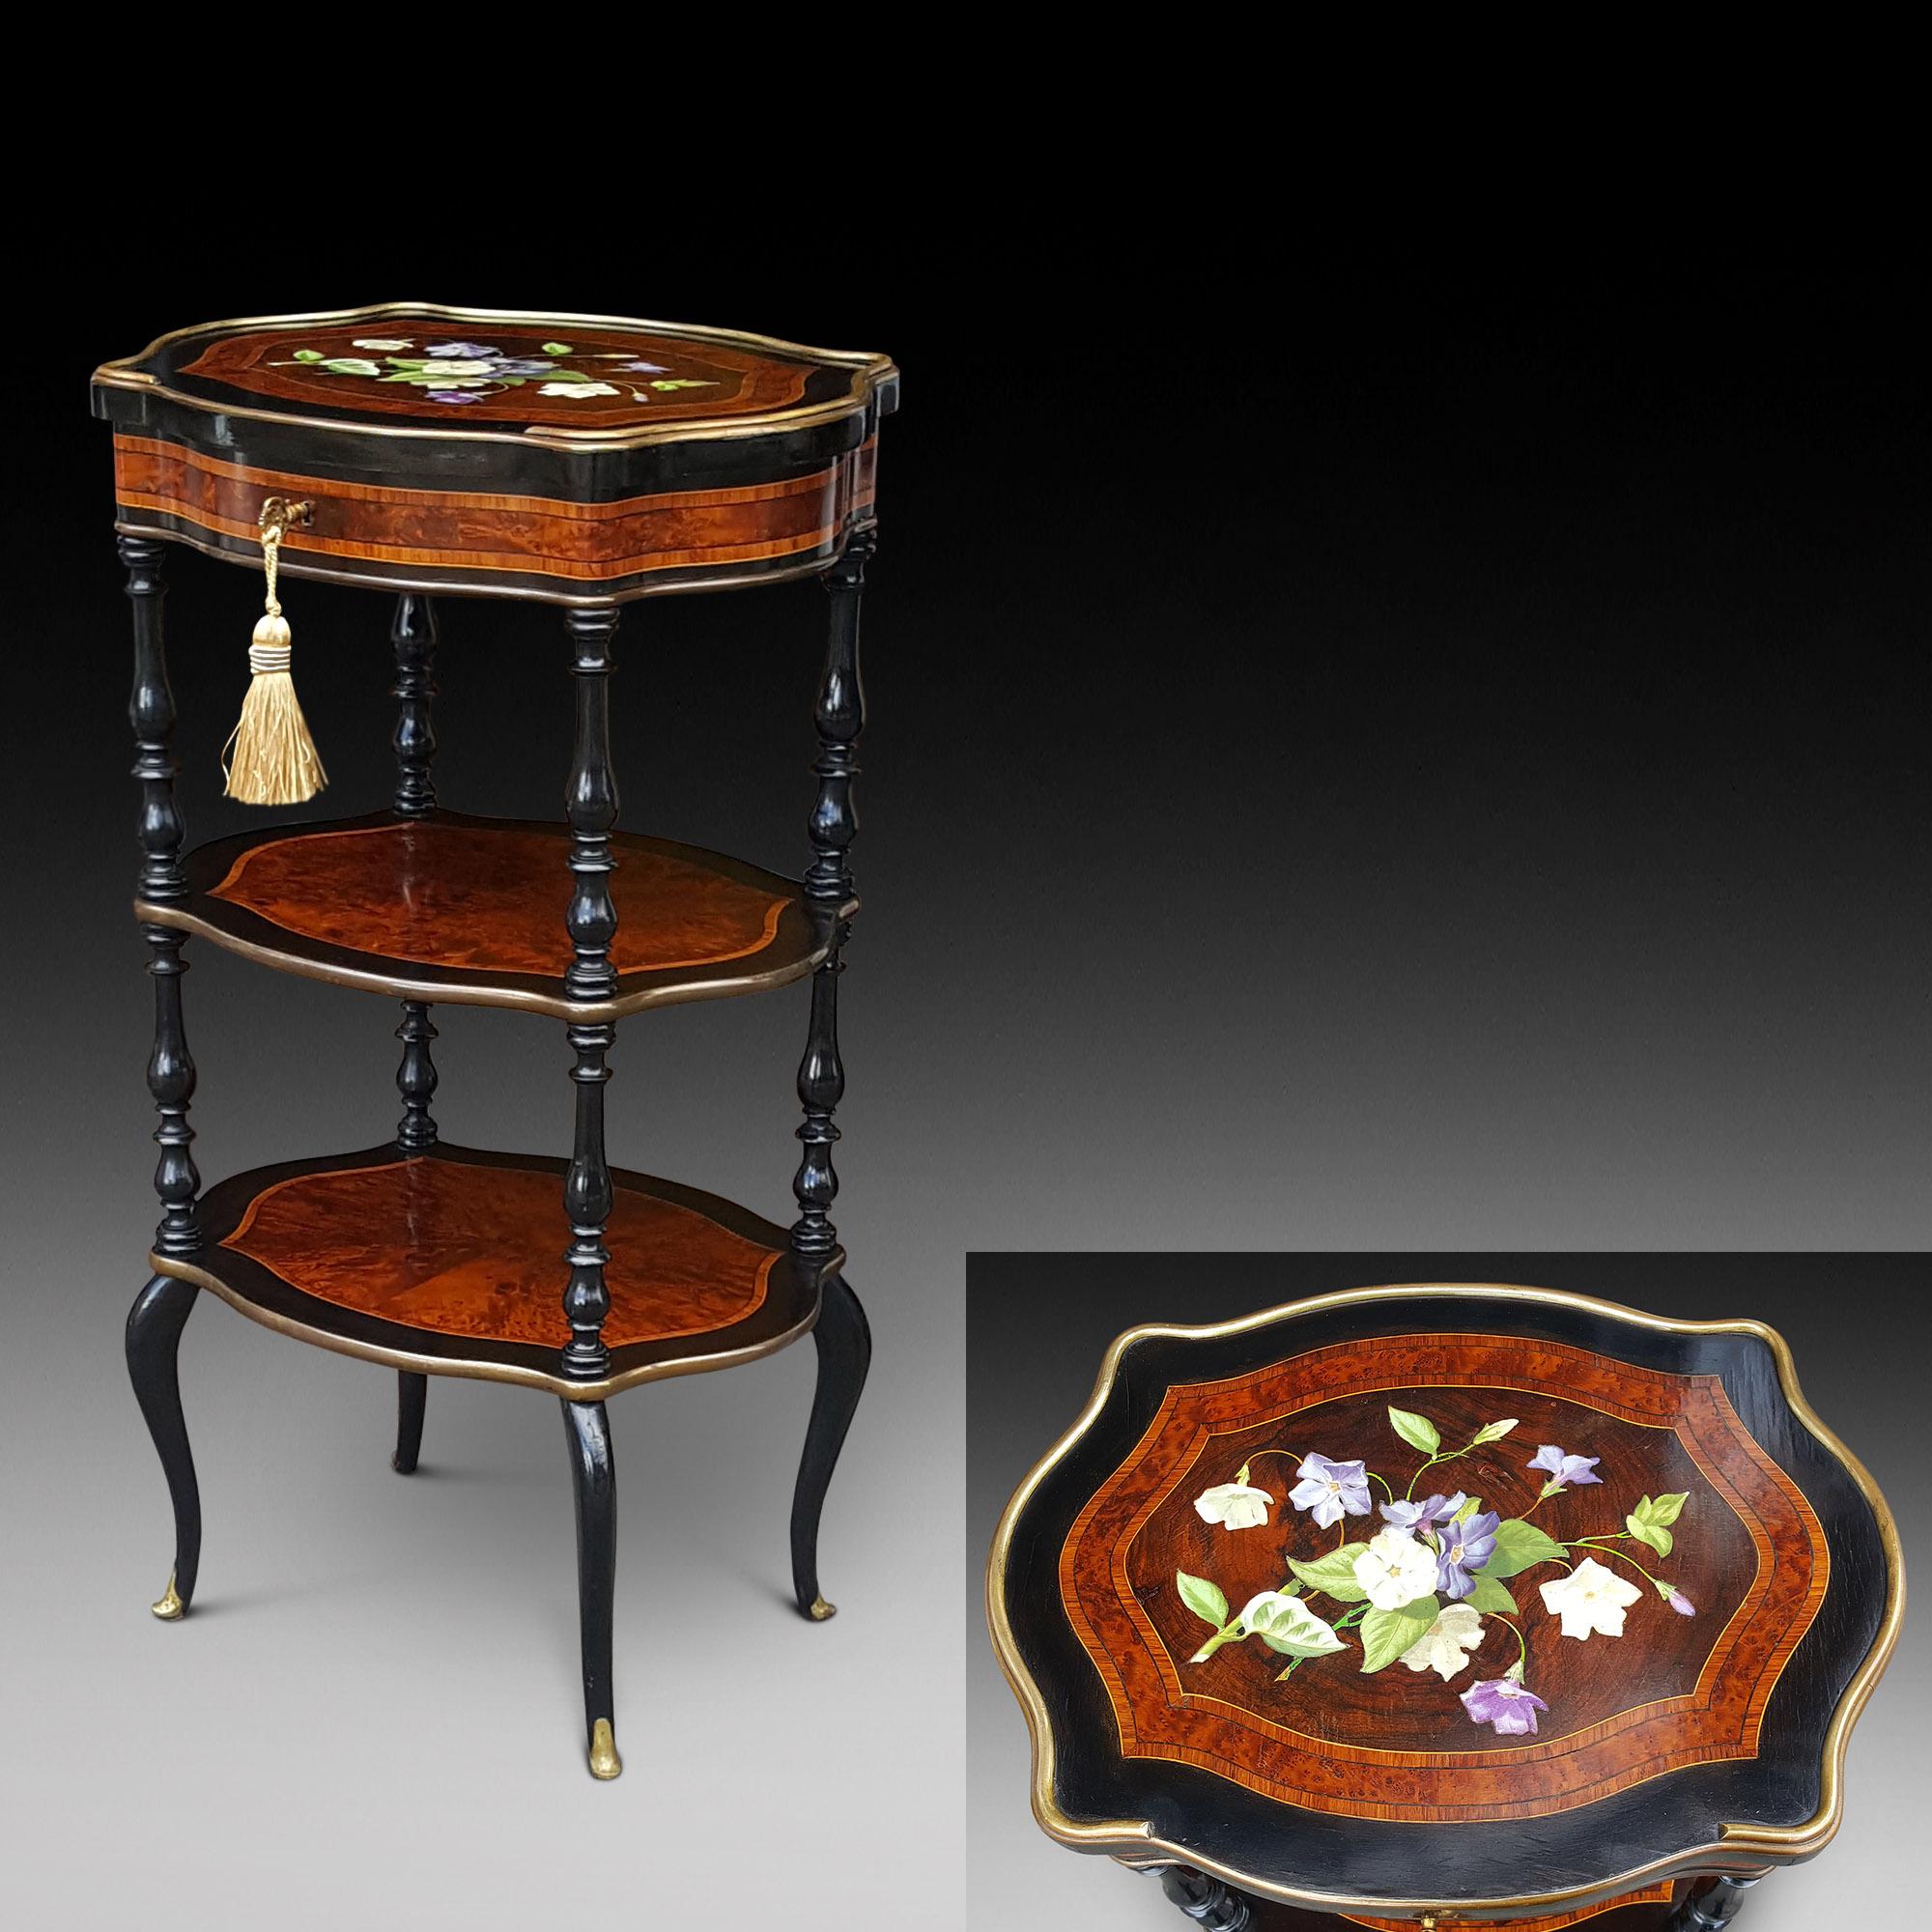 19th century French satinwood crossbanded burr yewwood and ebonised etergere vanity table with porcelain inlaid floral hinged top, revealing a mirrored interior; on turned columns and splayed feet 17.5